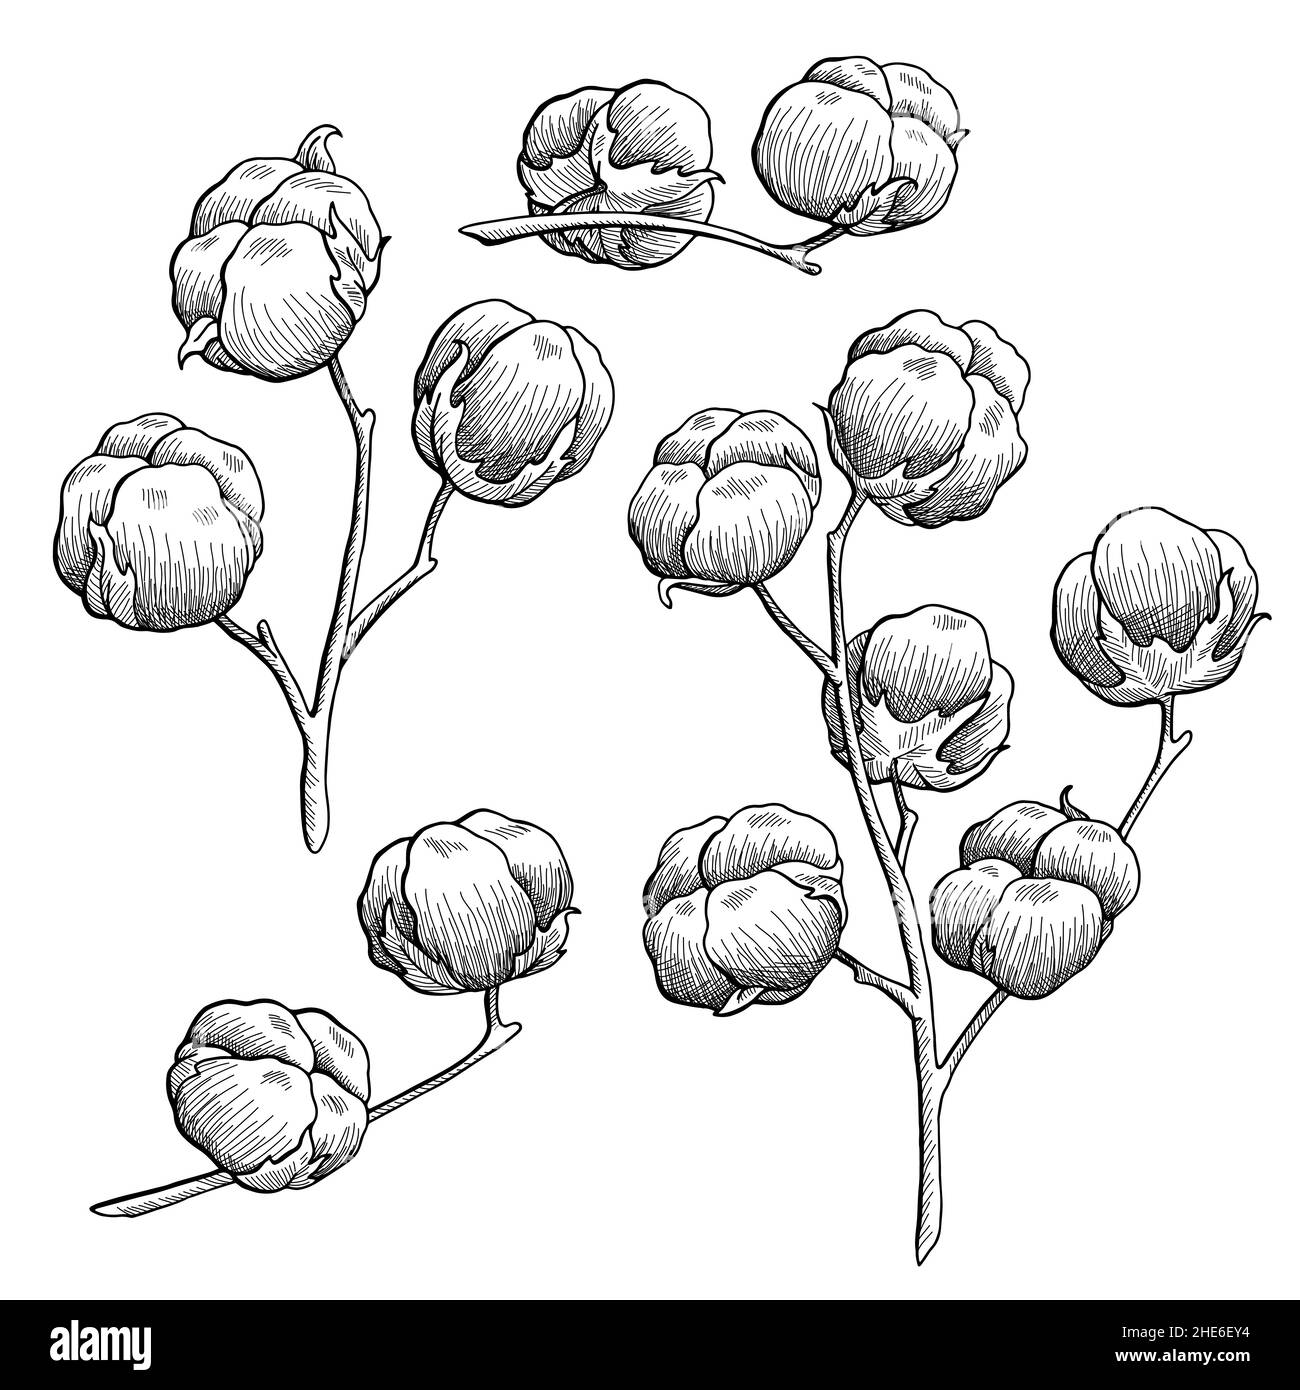 Cotton plant graphic black white isolated sketch illustration vector Stock Vector